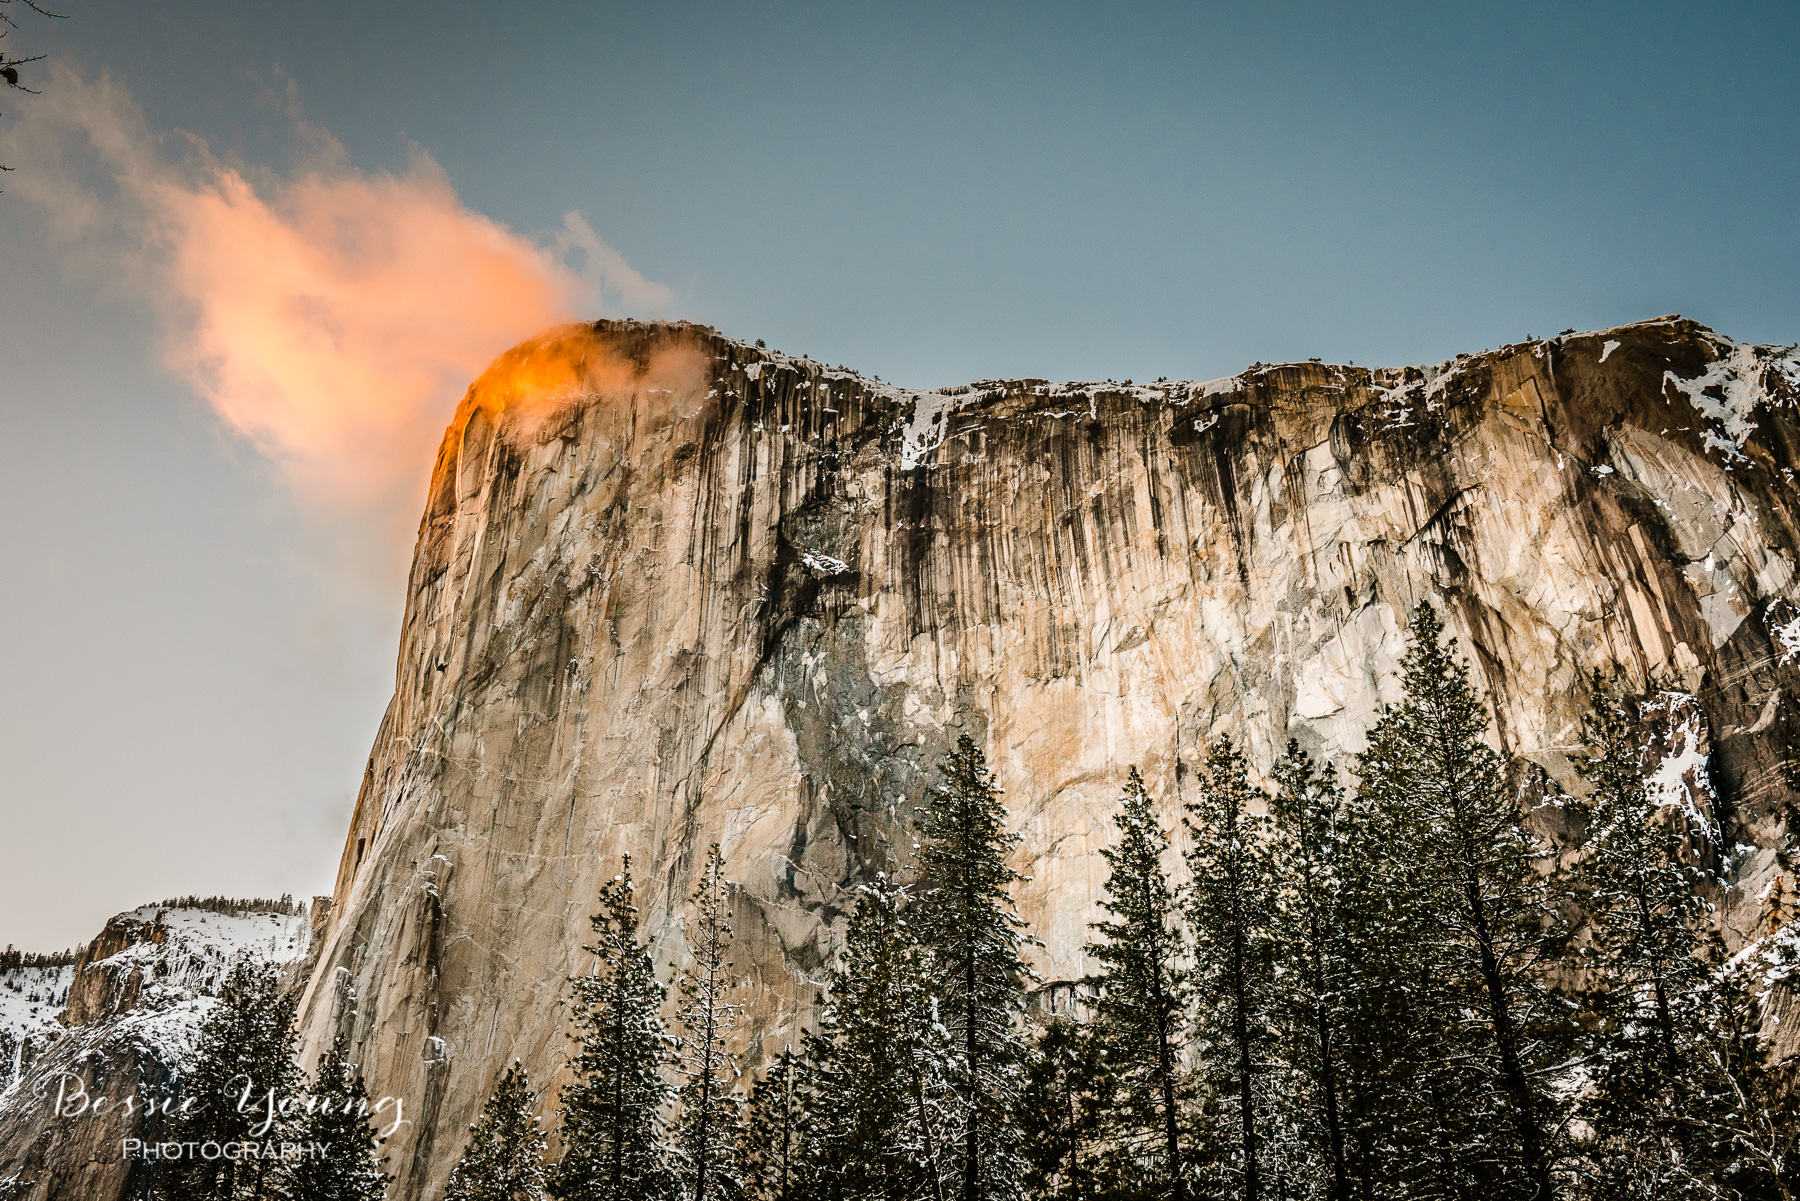 Yosemite National Park Photography - Yosemite Firefall 2019 by Bessie Young Photography